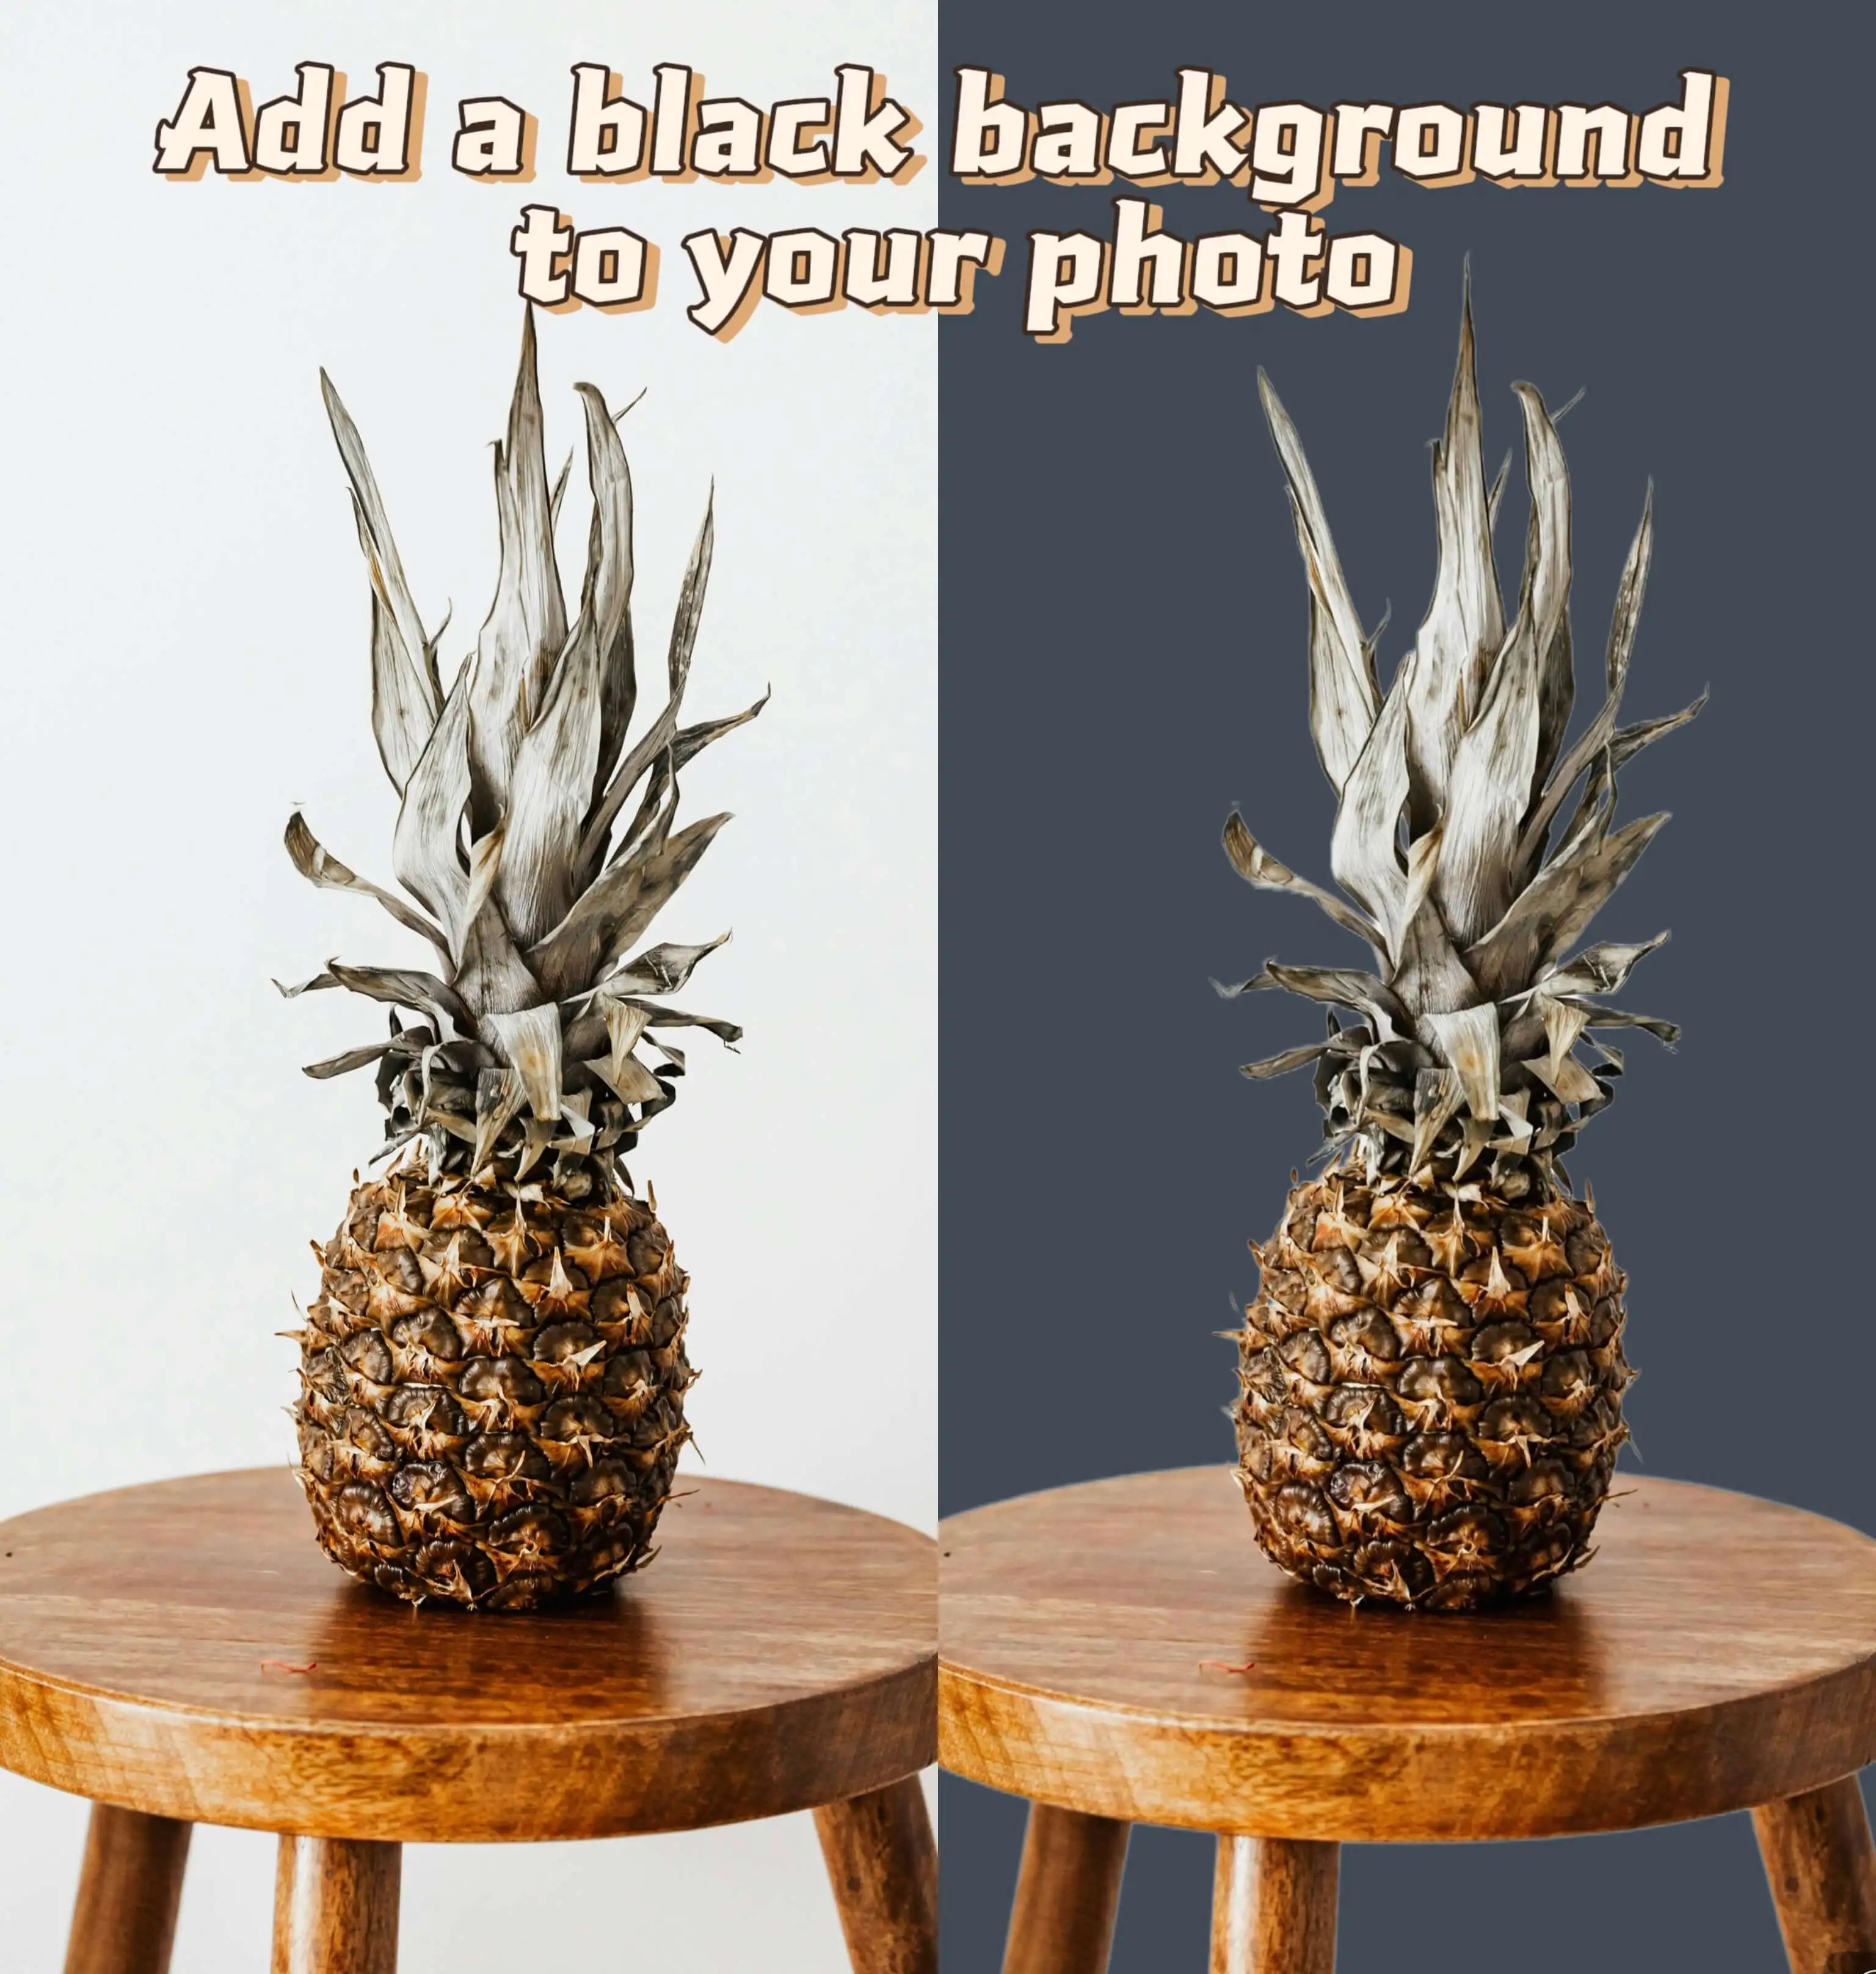 Tutorial on adding a black background to photos using insMind.